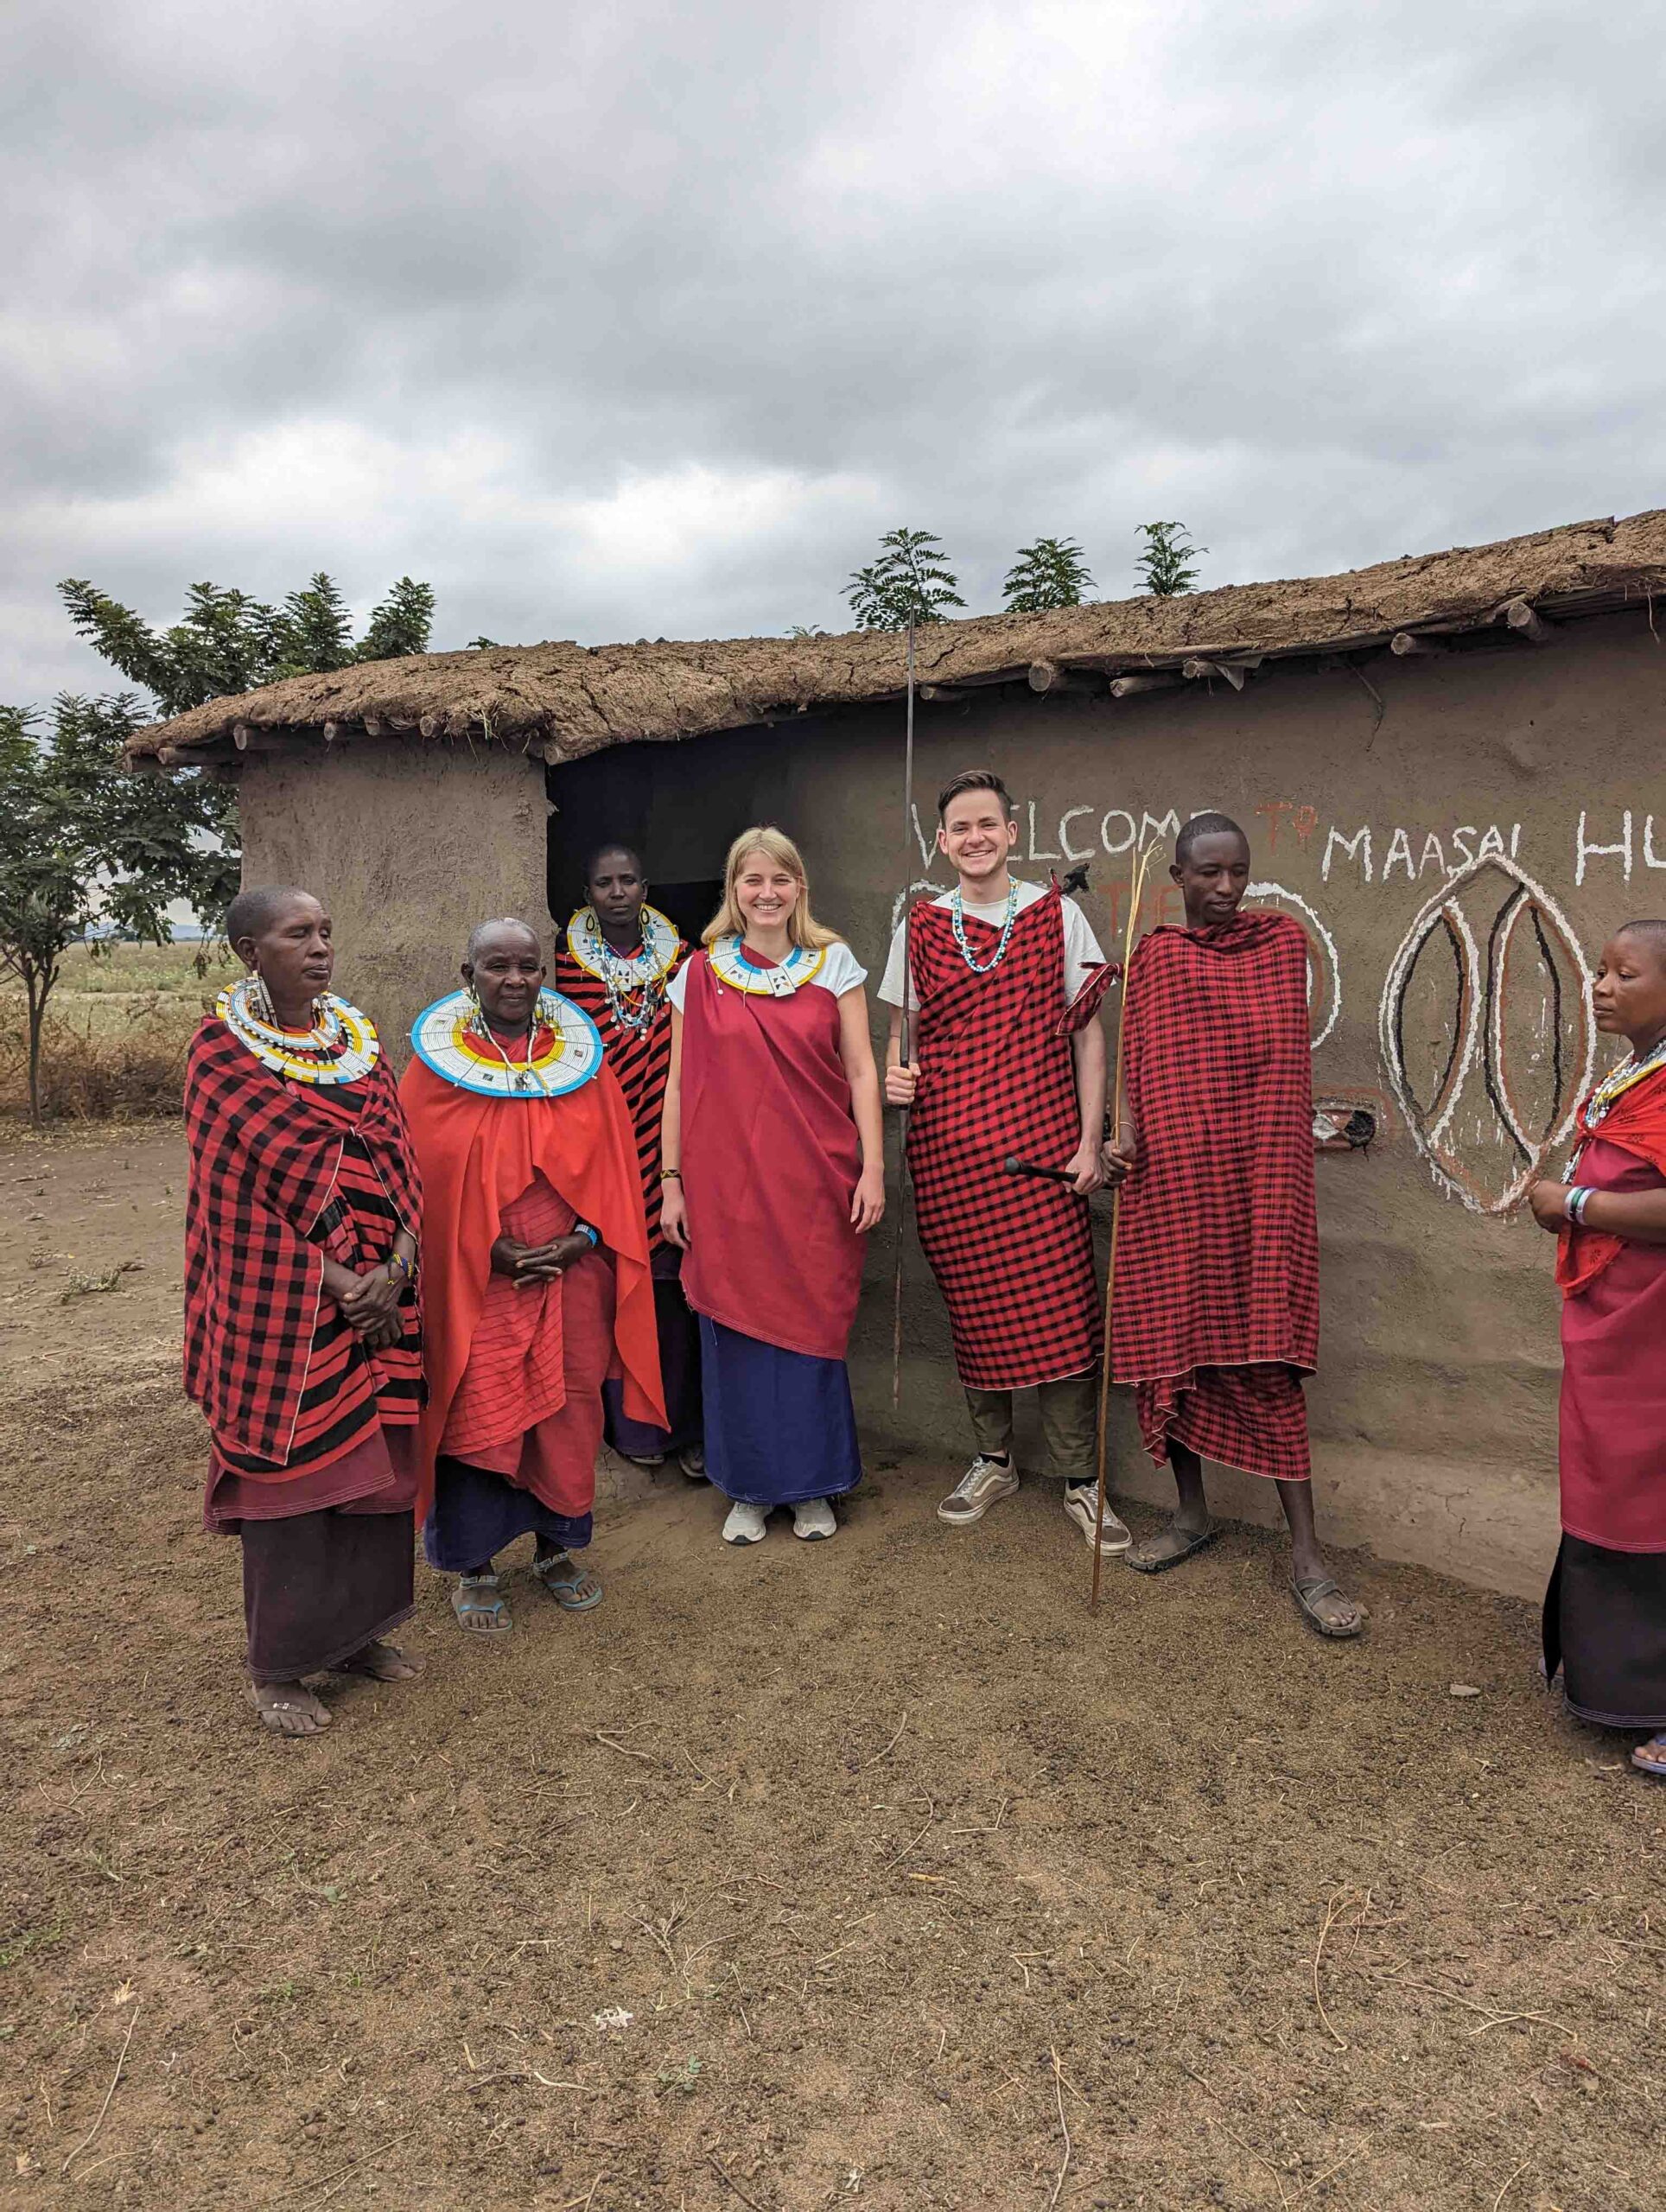 Cultural immersion with Maasai tribes on our unforgettable journeys